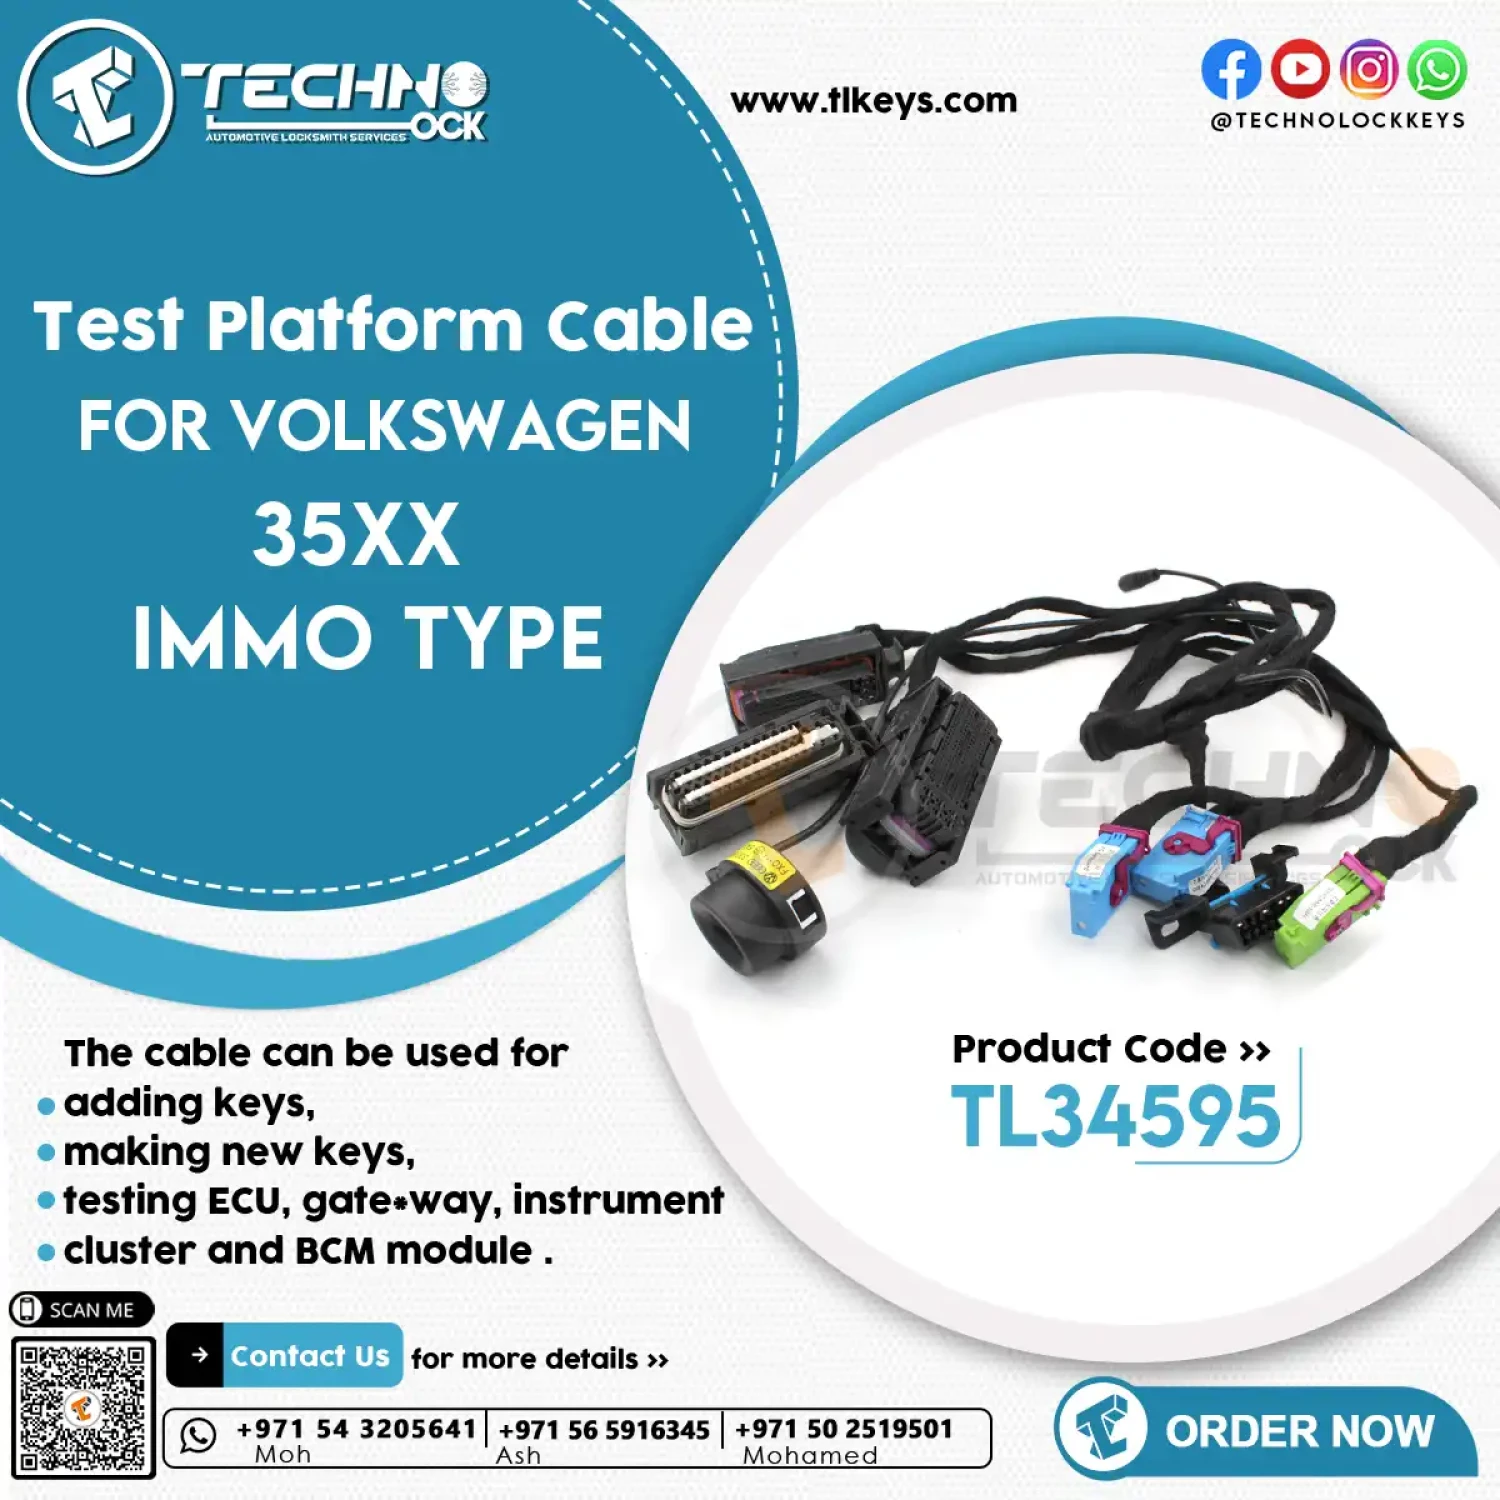 Volkswagen 35XX IMMO Test Platform Cable for diagnostic and programming your Passat's ECU, IMMO, and BCM